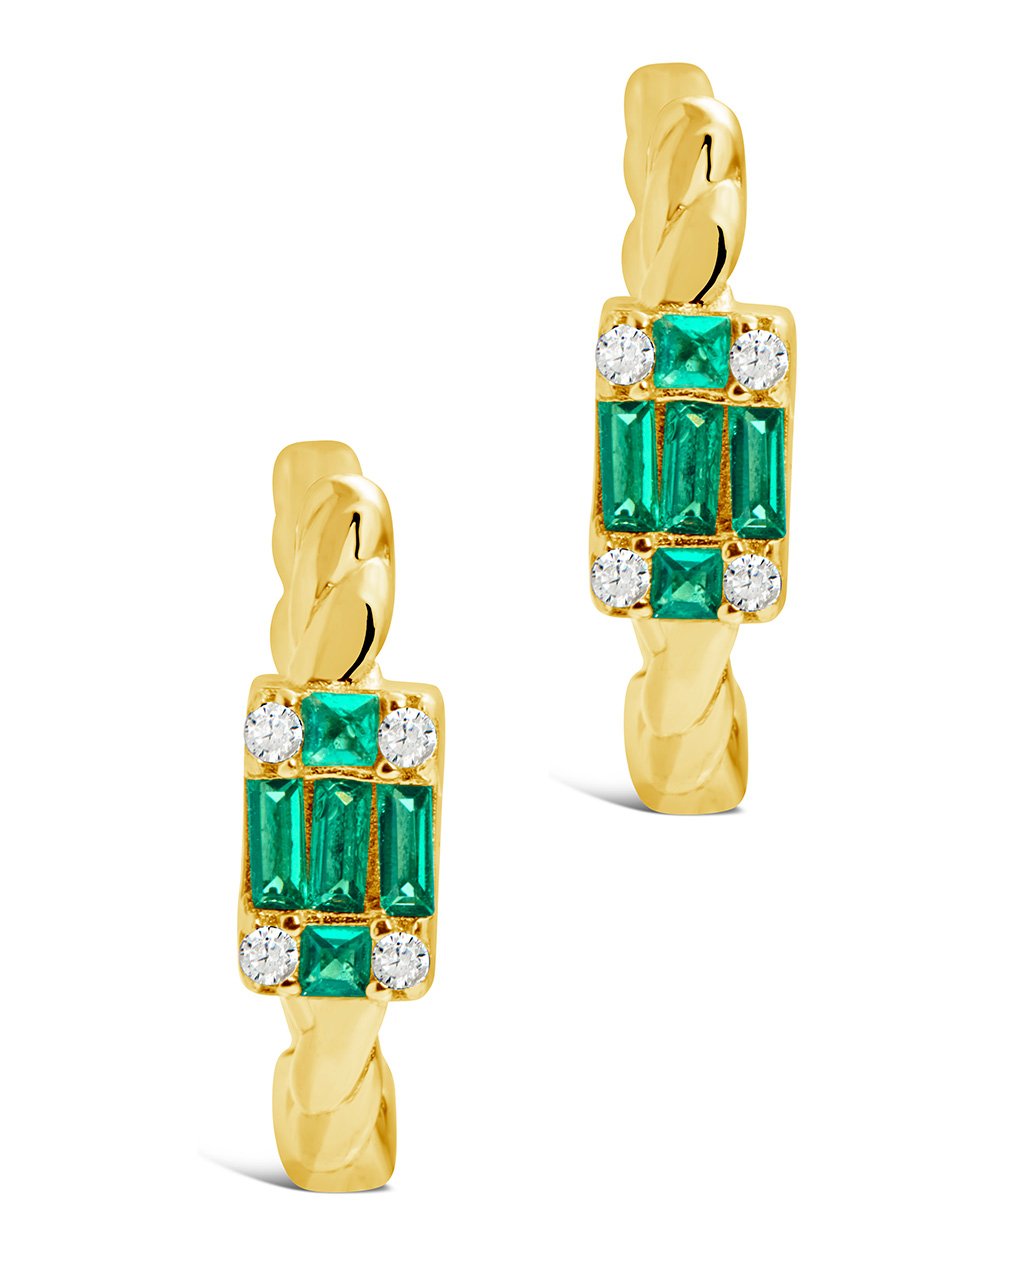 Sterling Silver Braided Micro Hoops with Emerald Baguette CZ Stones Earring Sterling Forever 